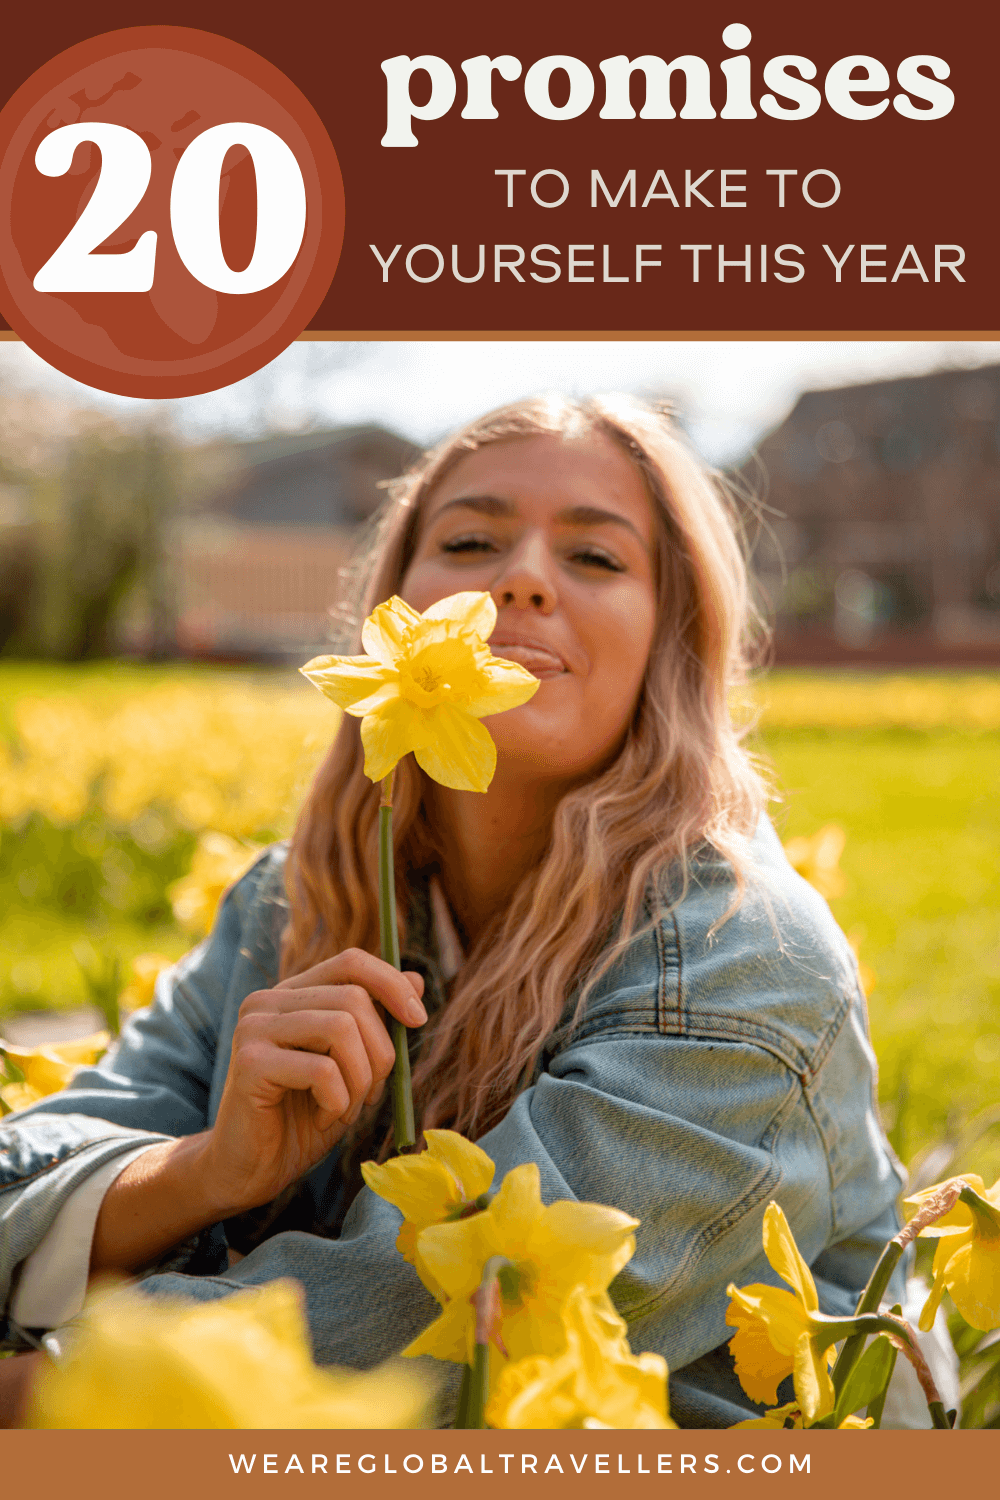 20 promises to make to yourself